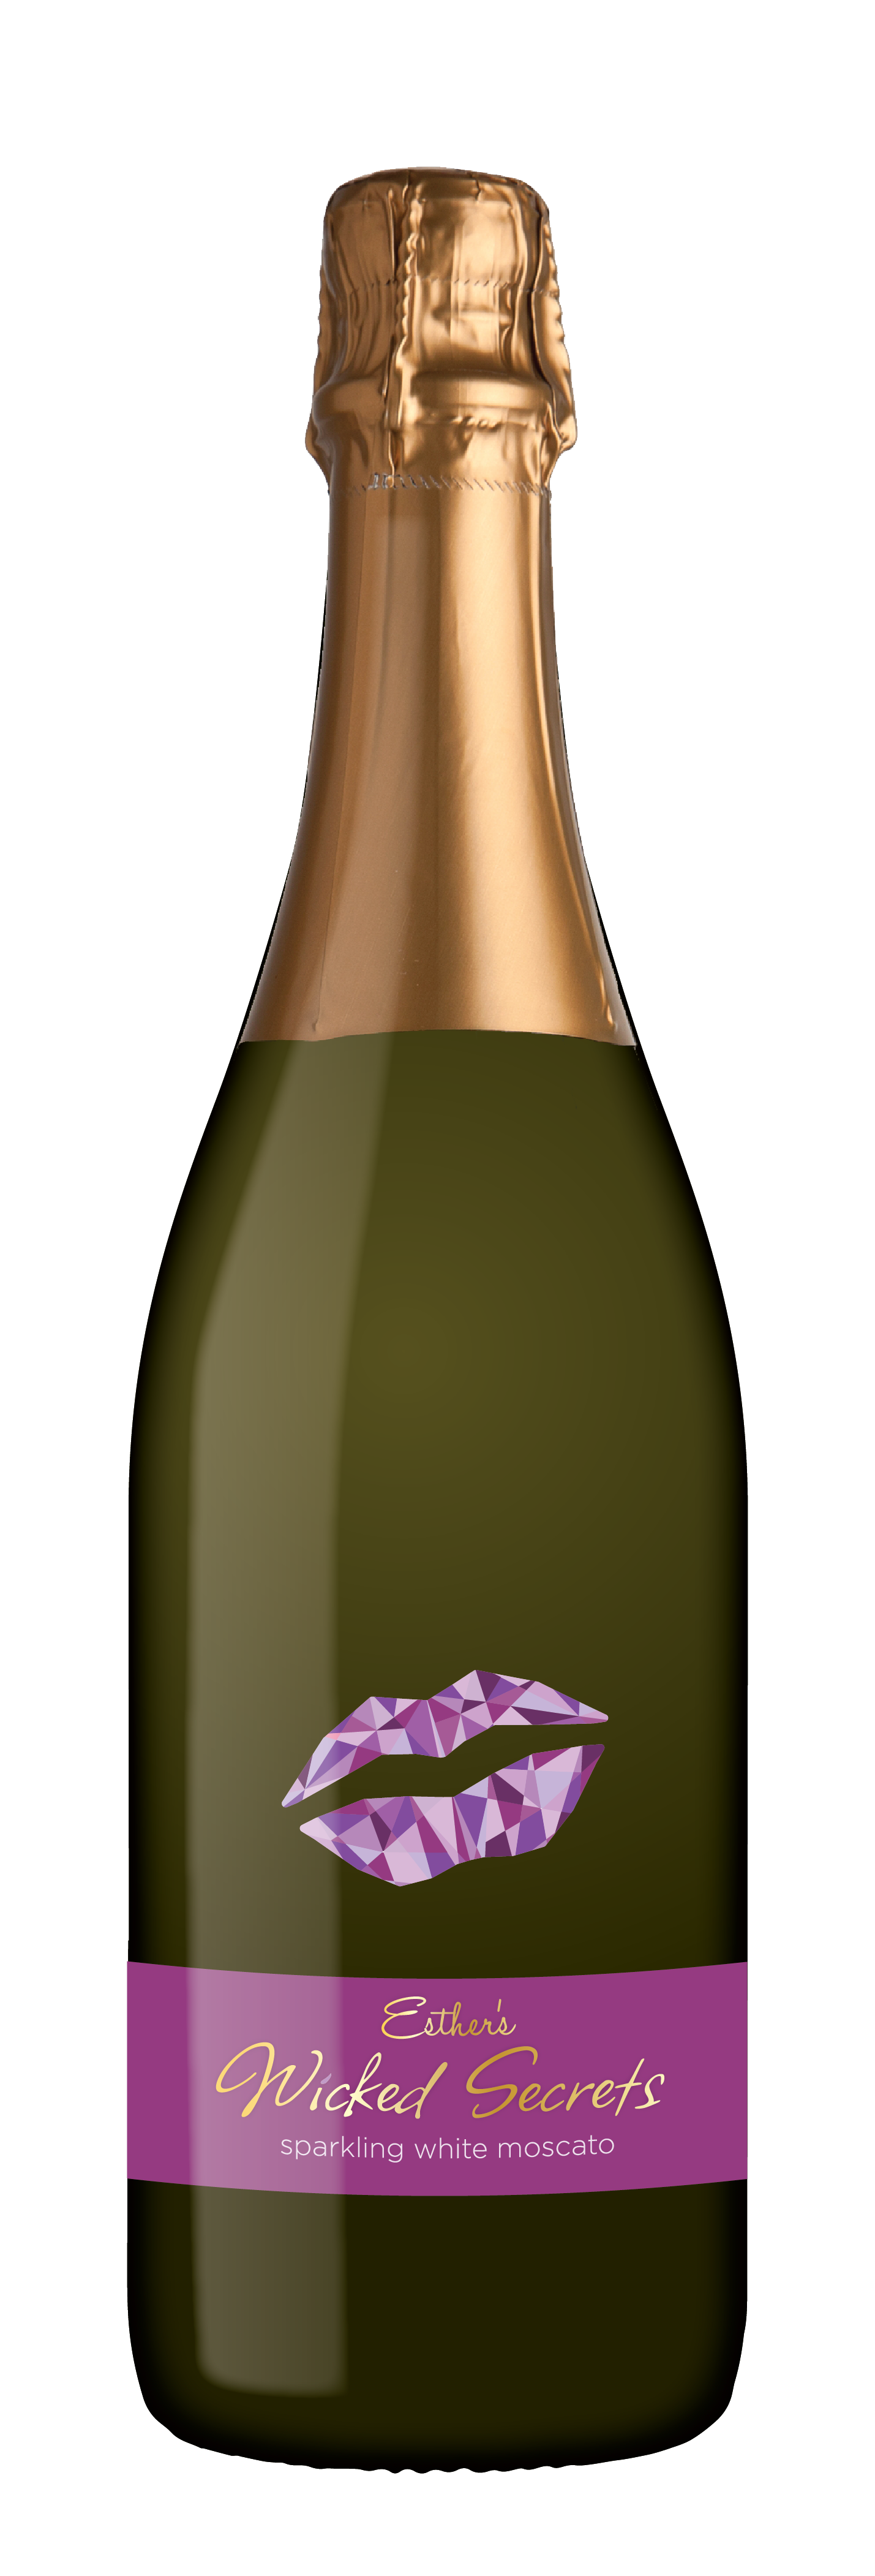 Wicked Secrets Wines Sparkling White Moscato